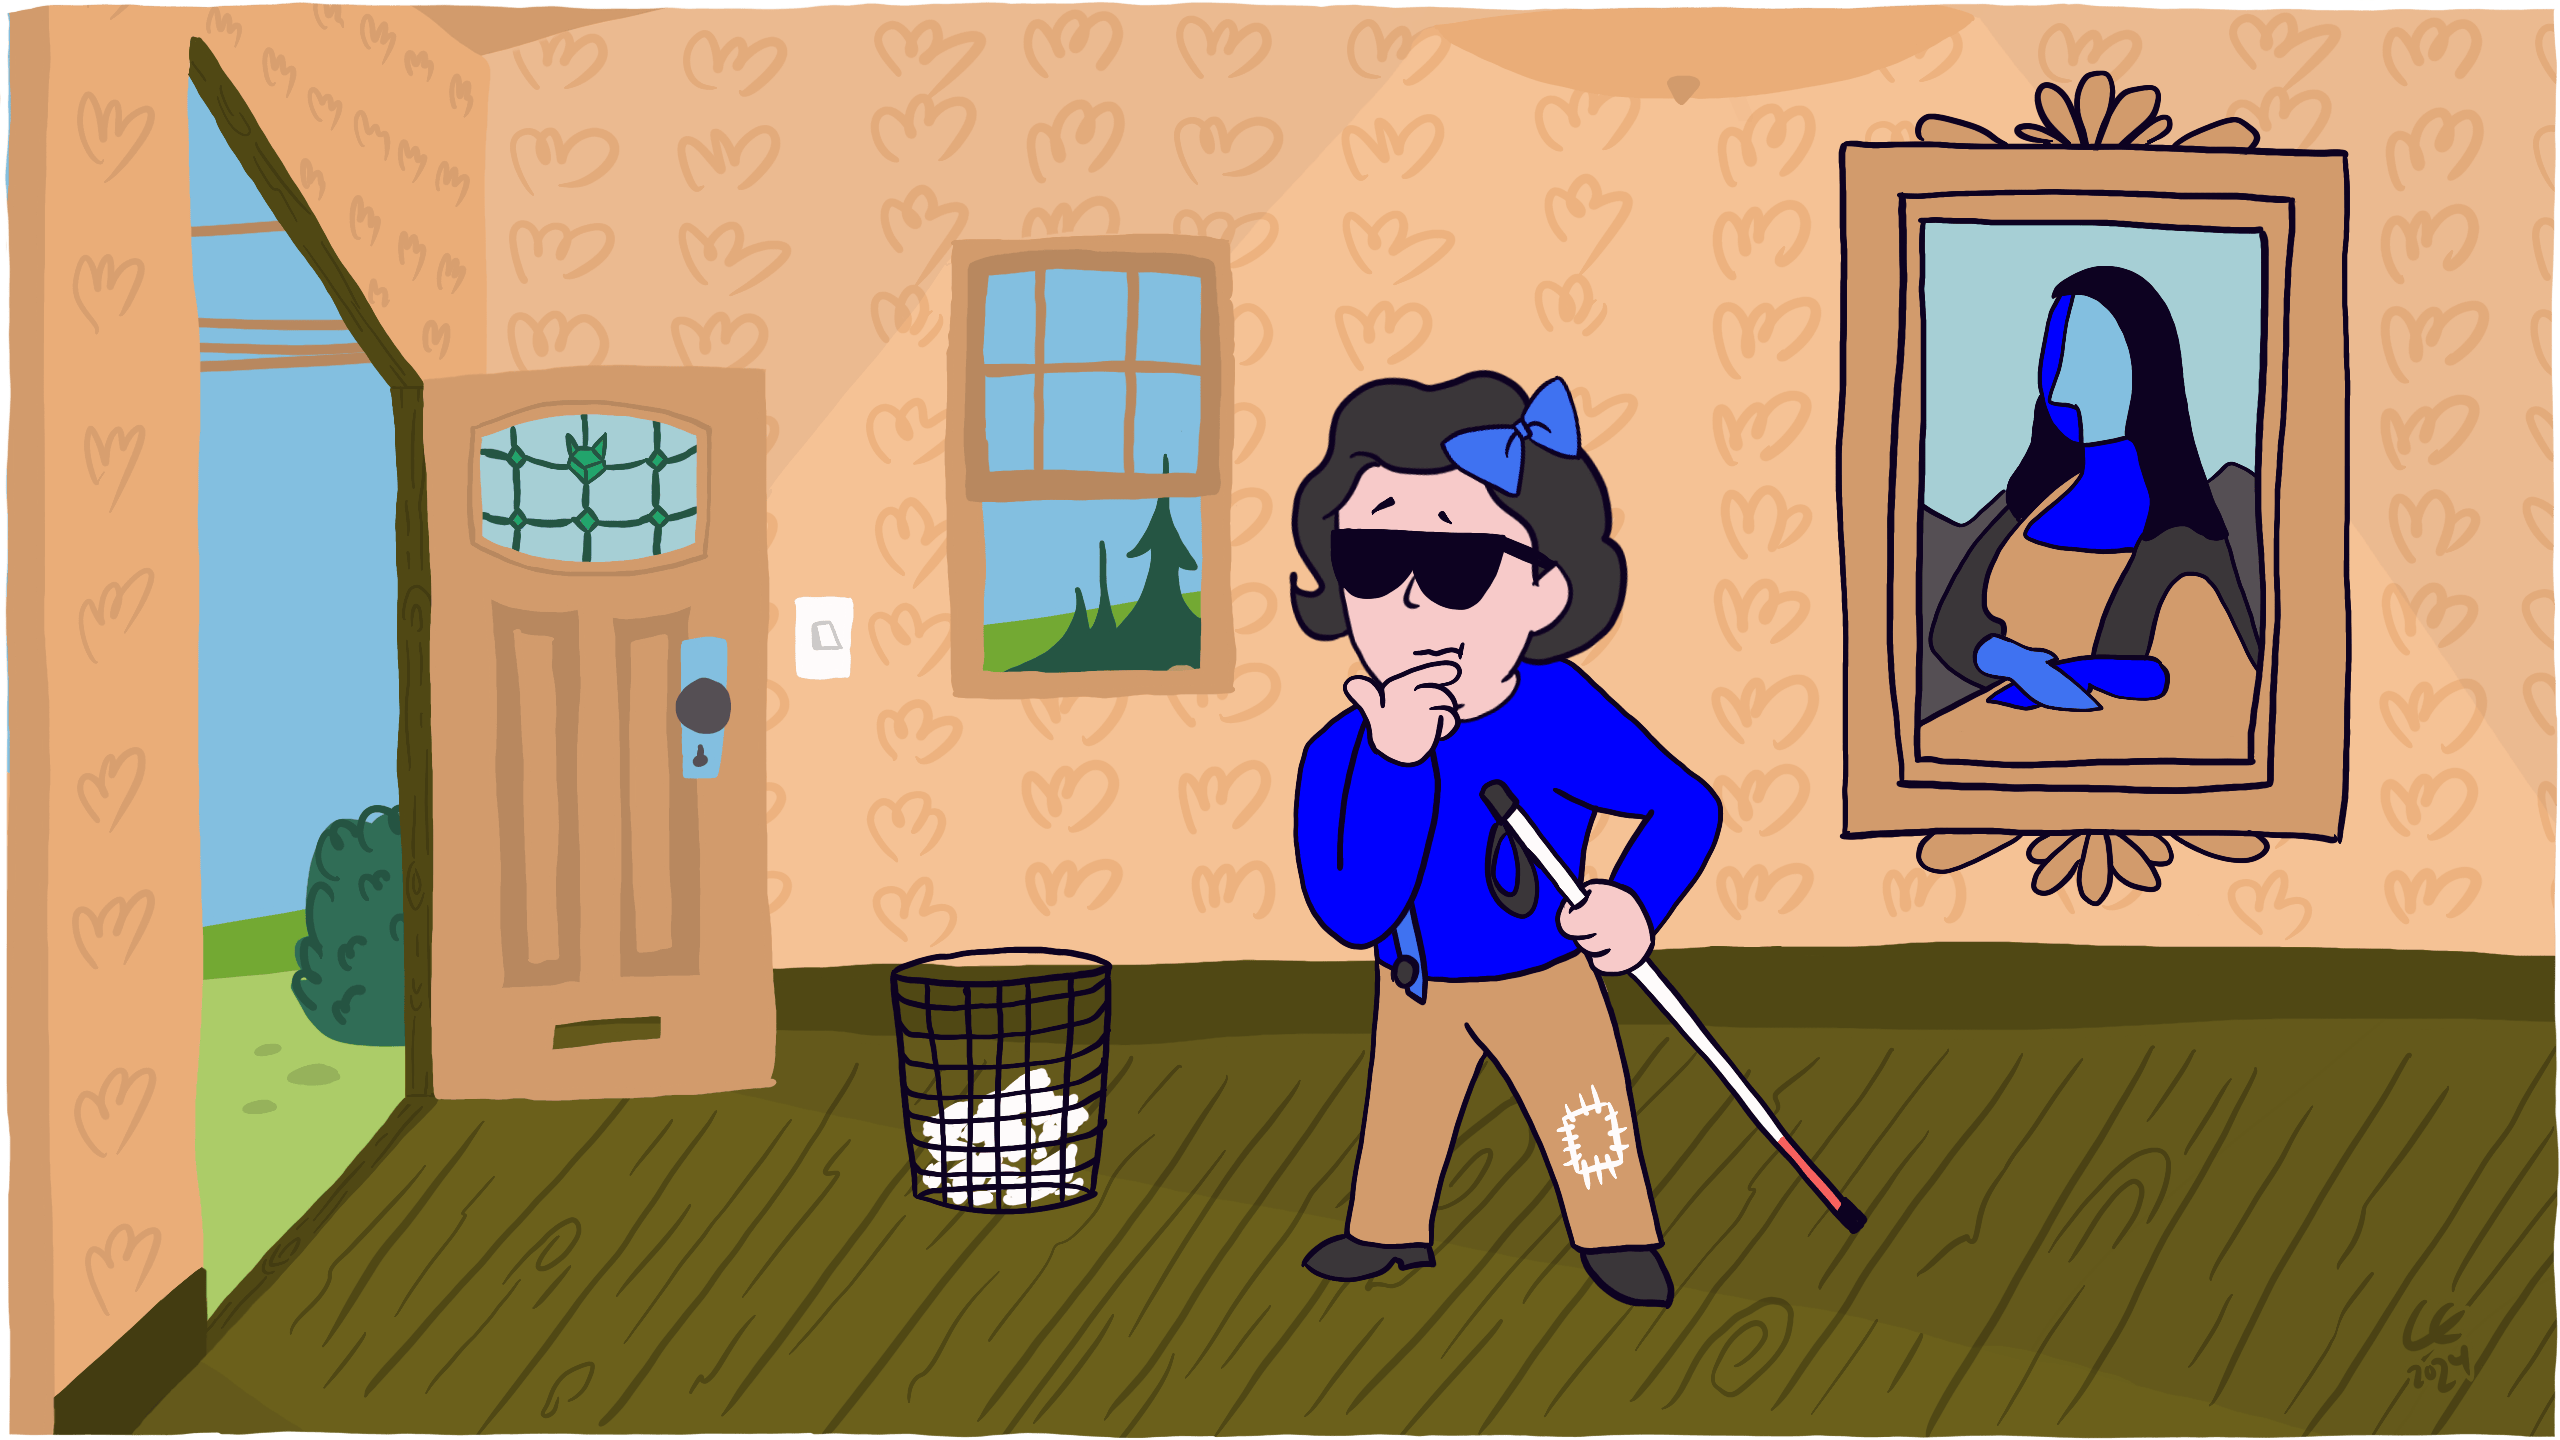 Frankie is blind, standing and admiring a piece of art, except they're facing a bin instead of the Mona Lisa. Illustration by Carlos Eriksson.